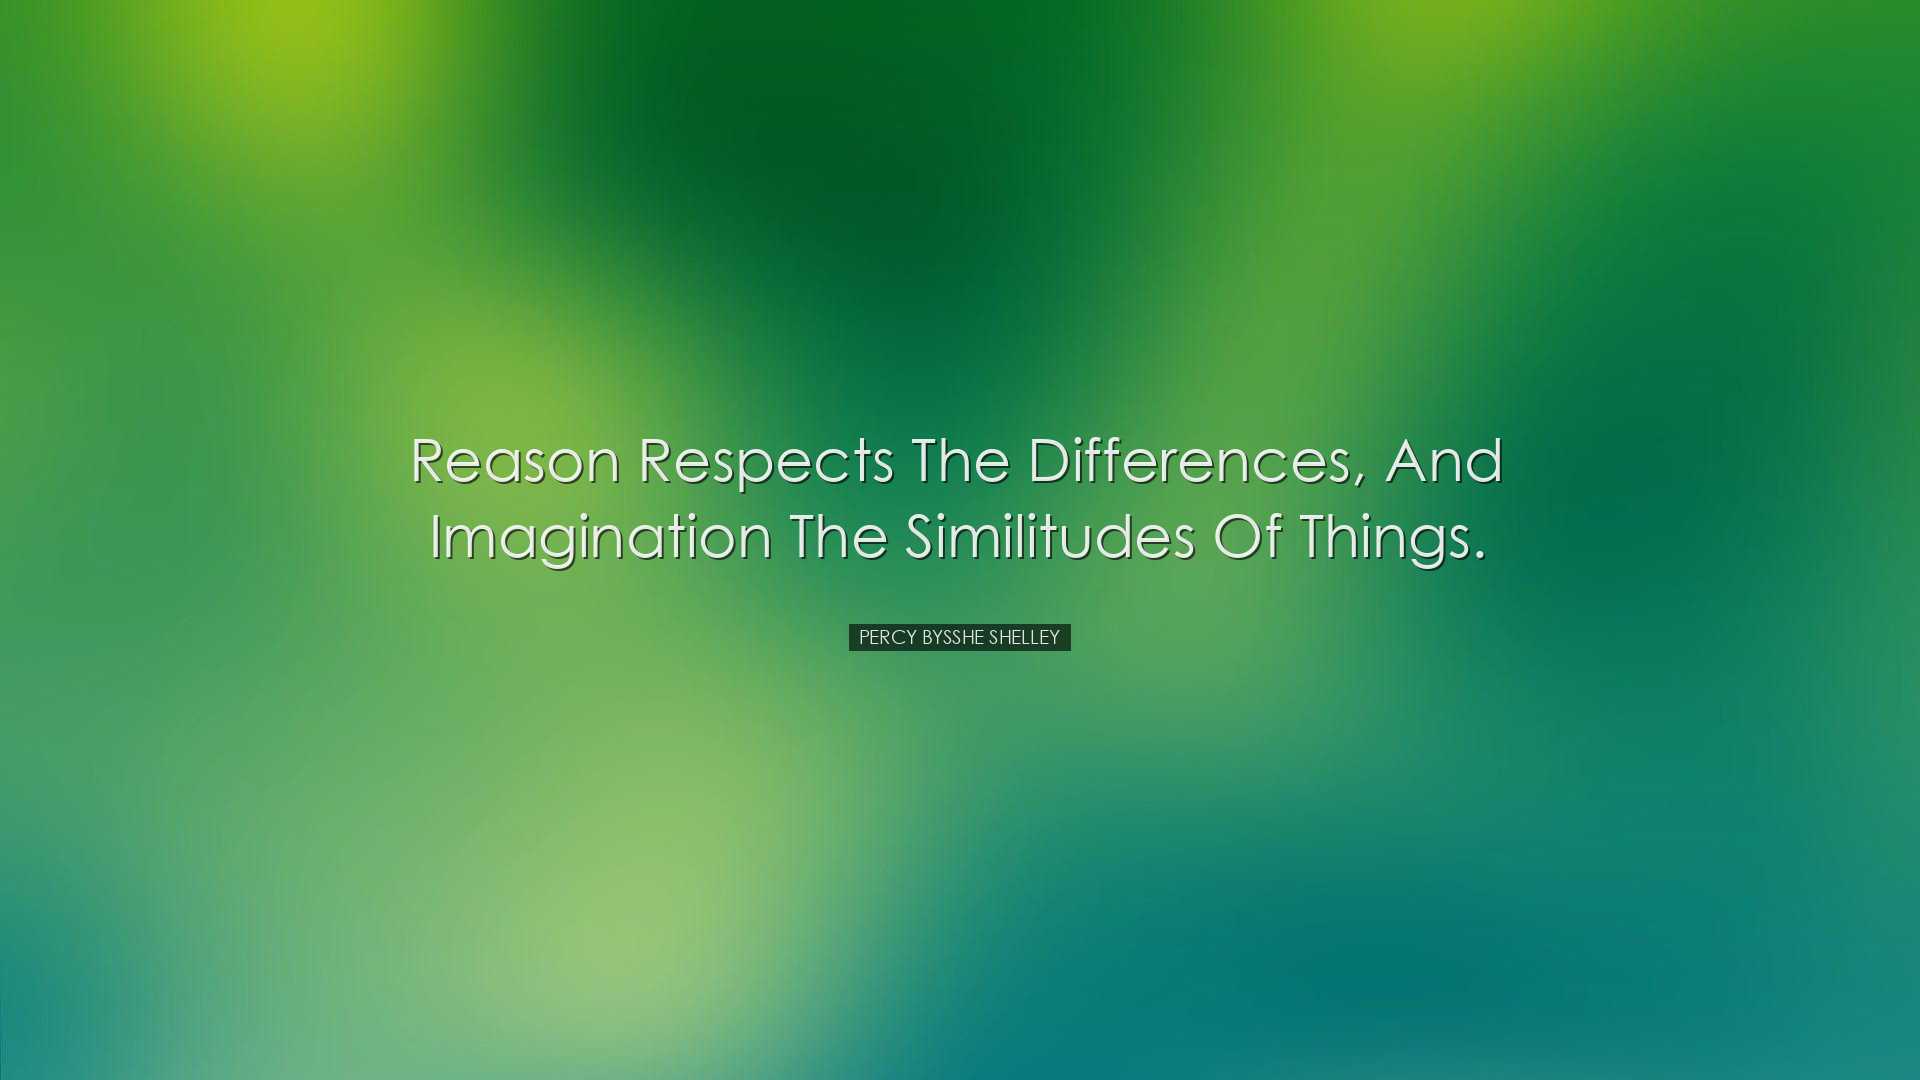 Reason respects the differences, and imagination the similitudes o